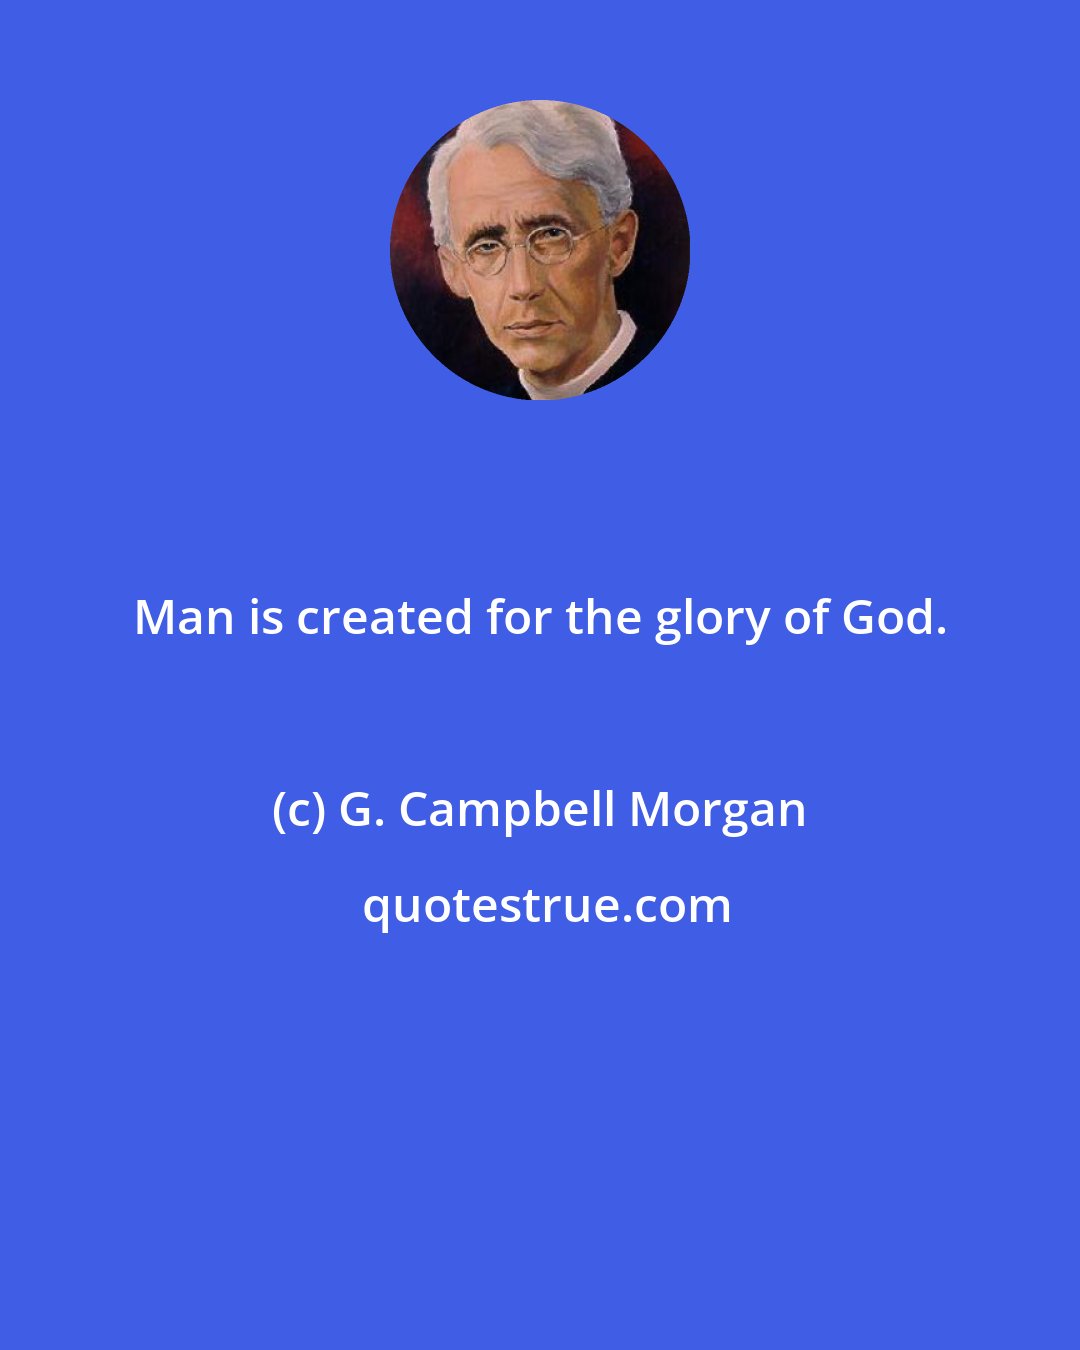 G. Campbell Morgan: Man is created for the glory of God.